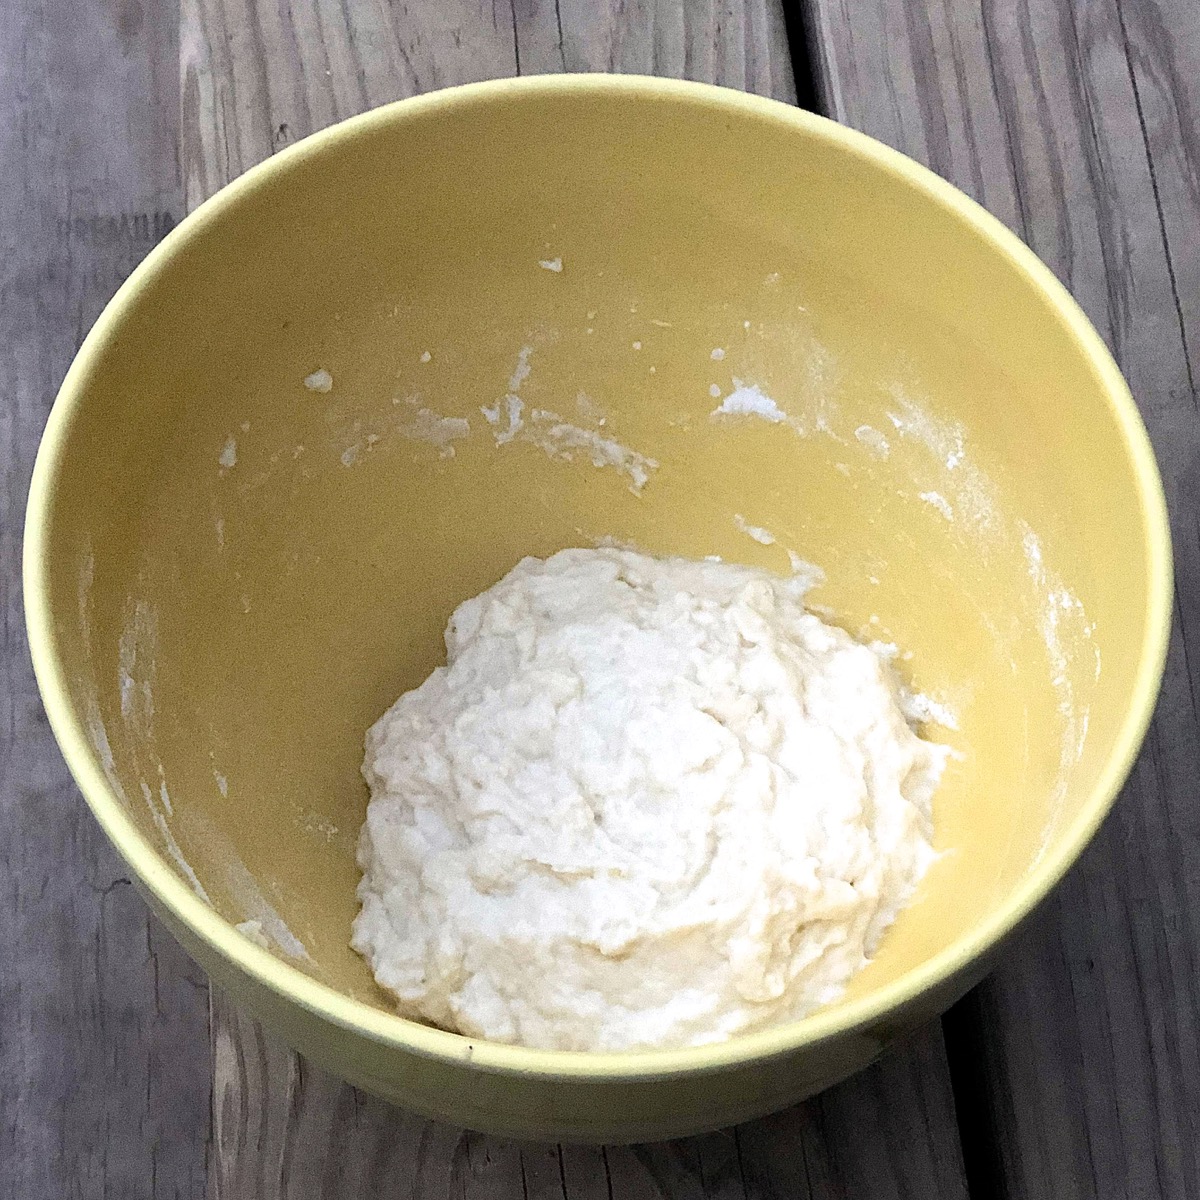 Yeast water mixed with flour in a bowl.